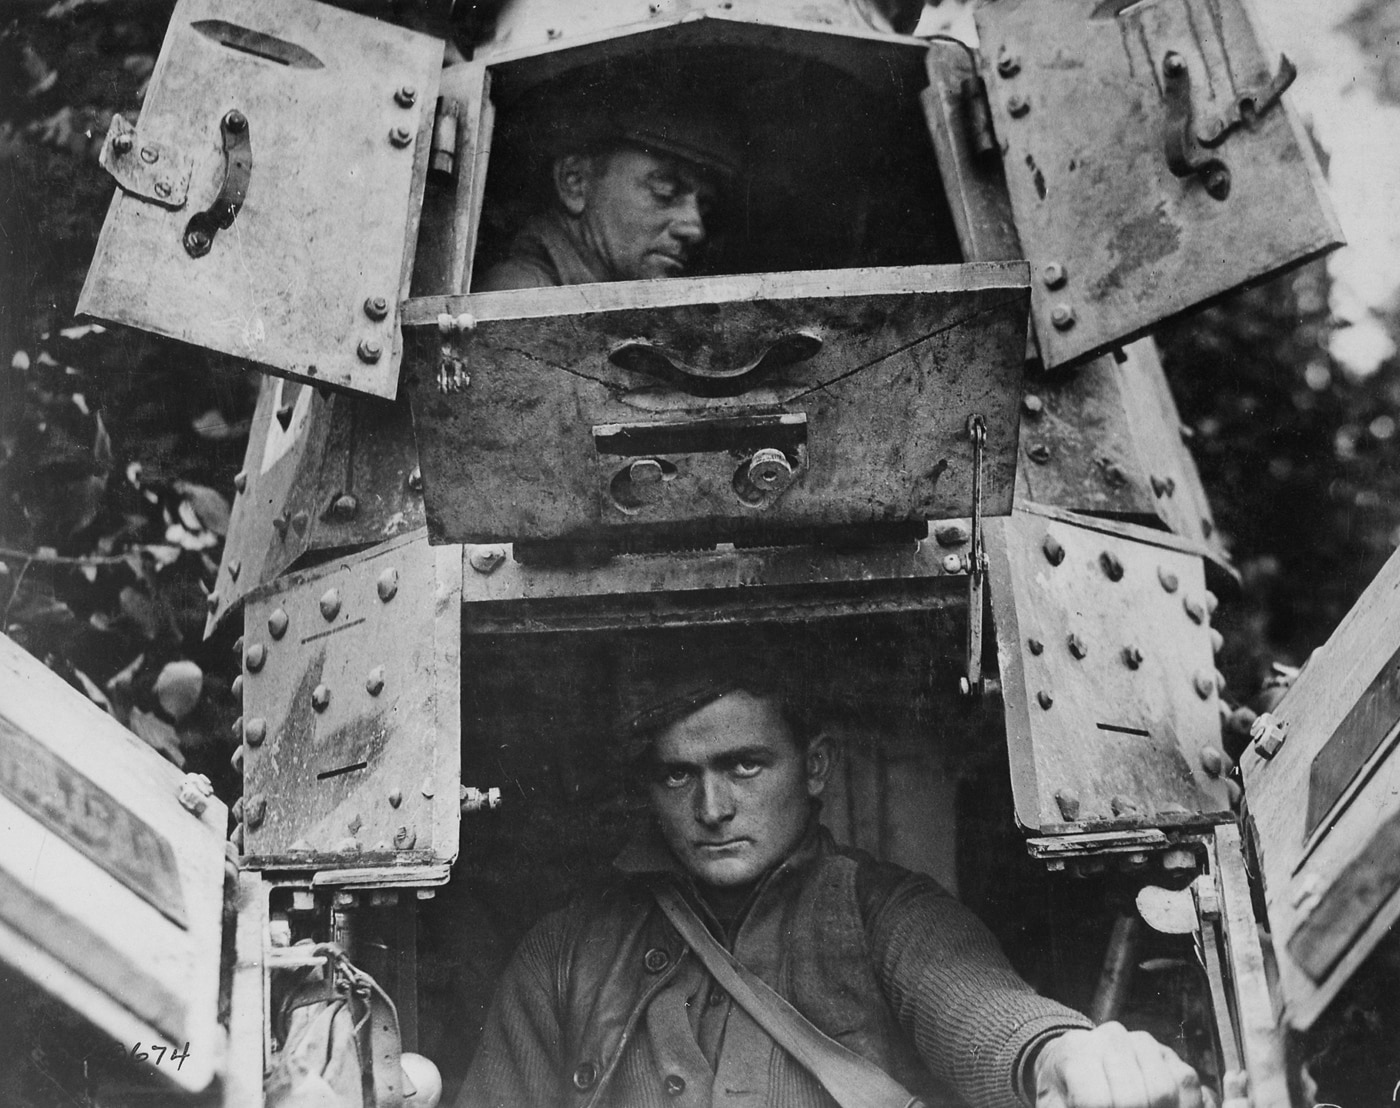 hatches on Renault FT tank